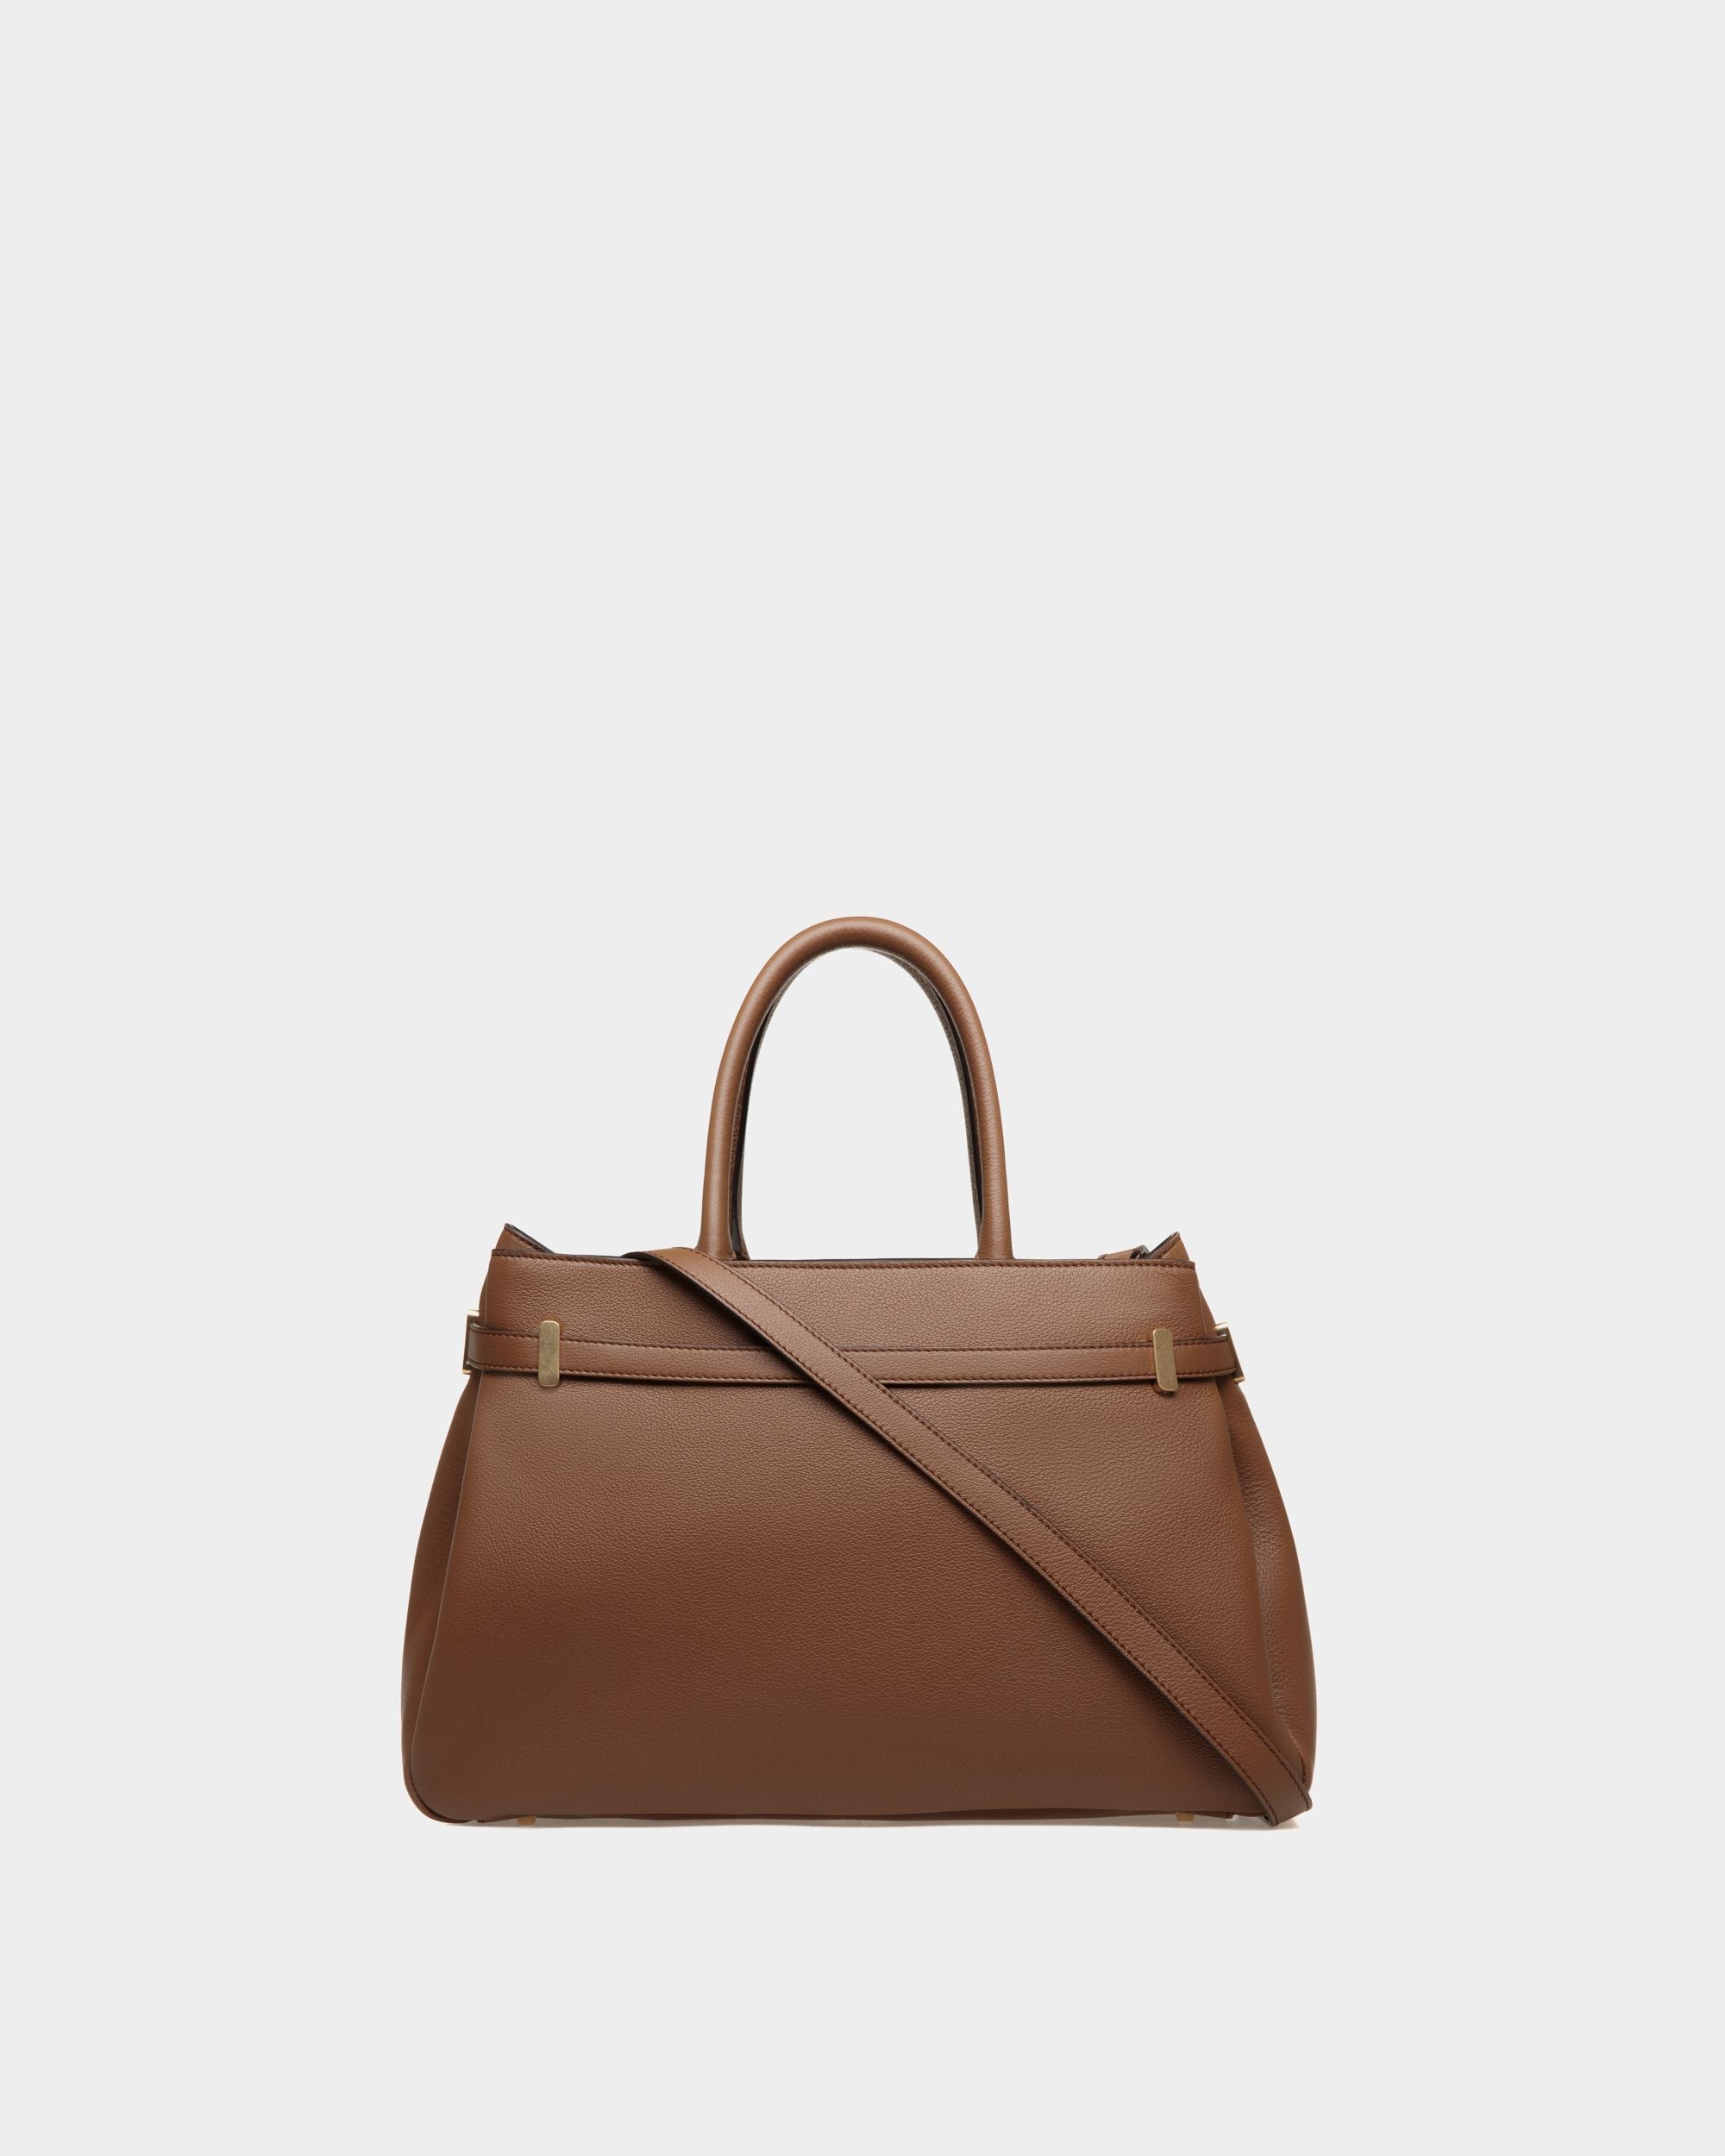 Carriage | Women's Tote Bag in Brown Leather | Bally | Still Life Back